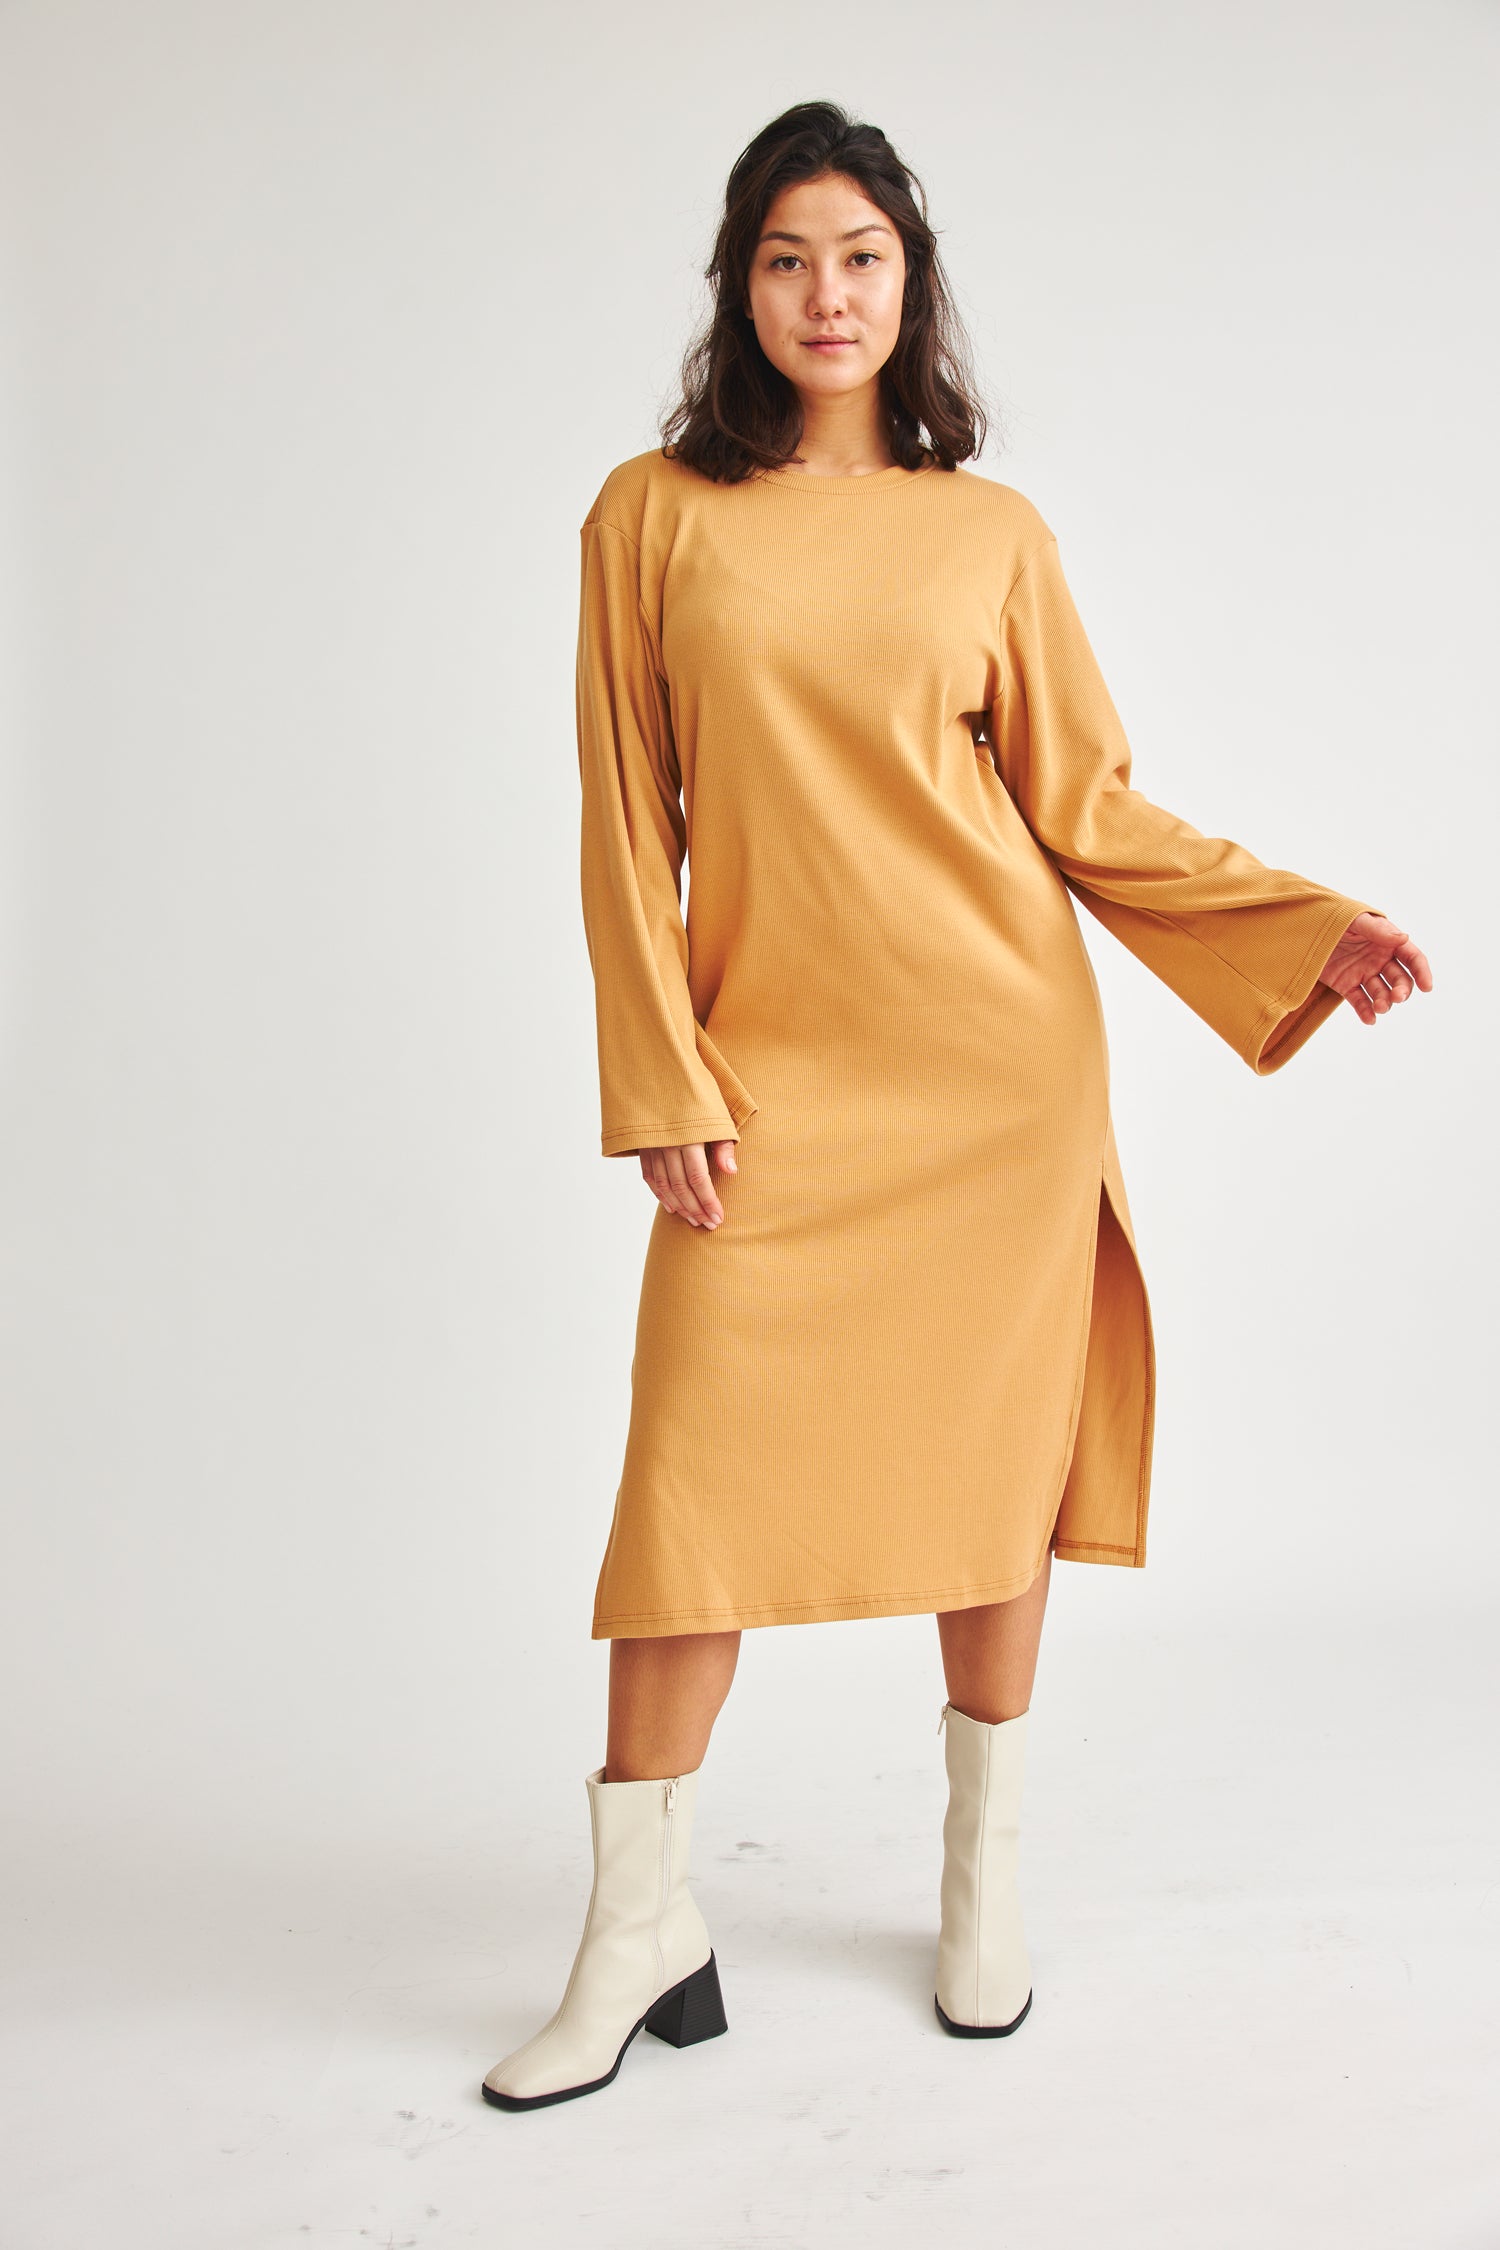 Yellow Becca dress made of organic cotton from Baige the Label